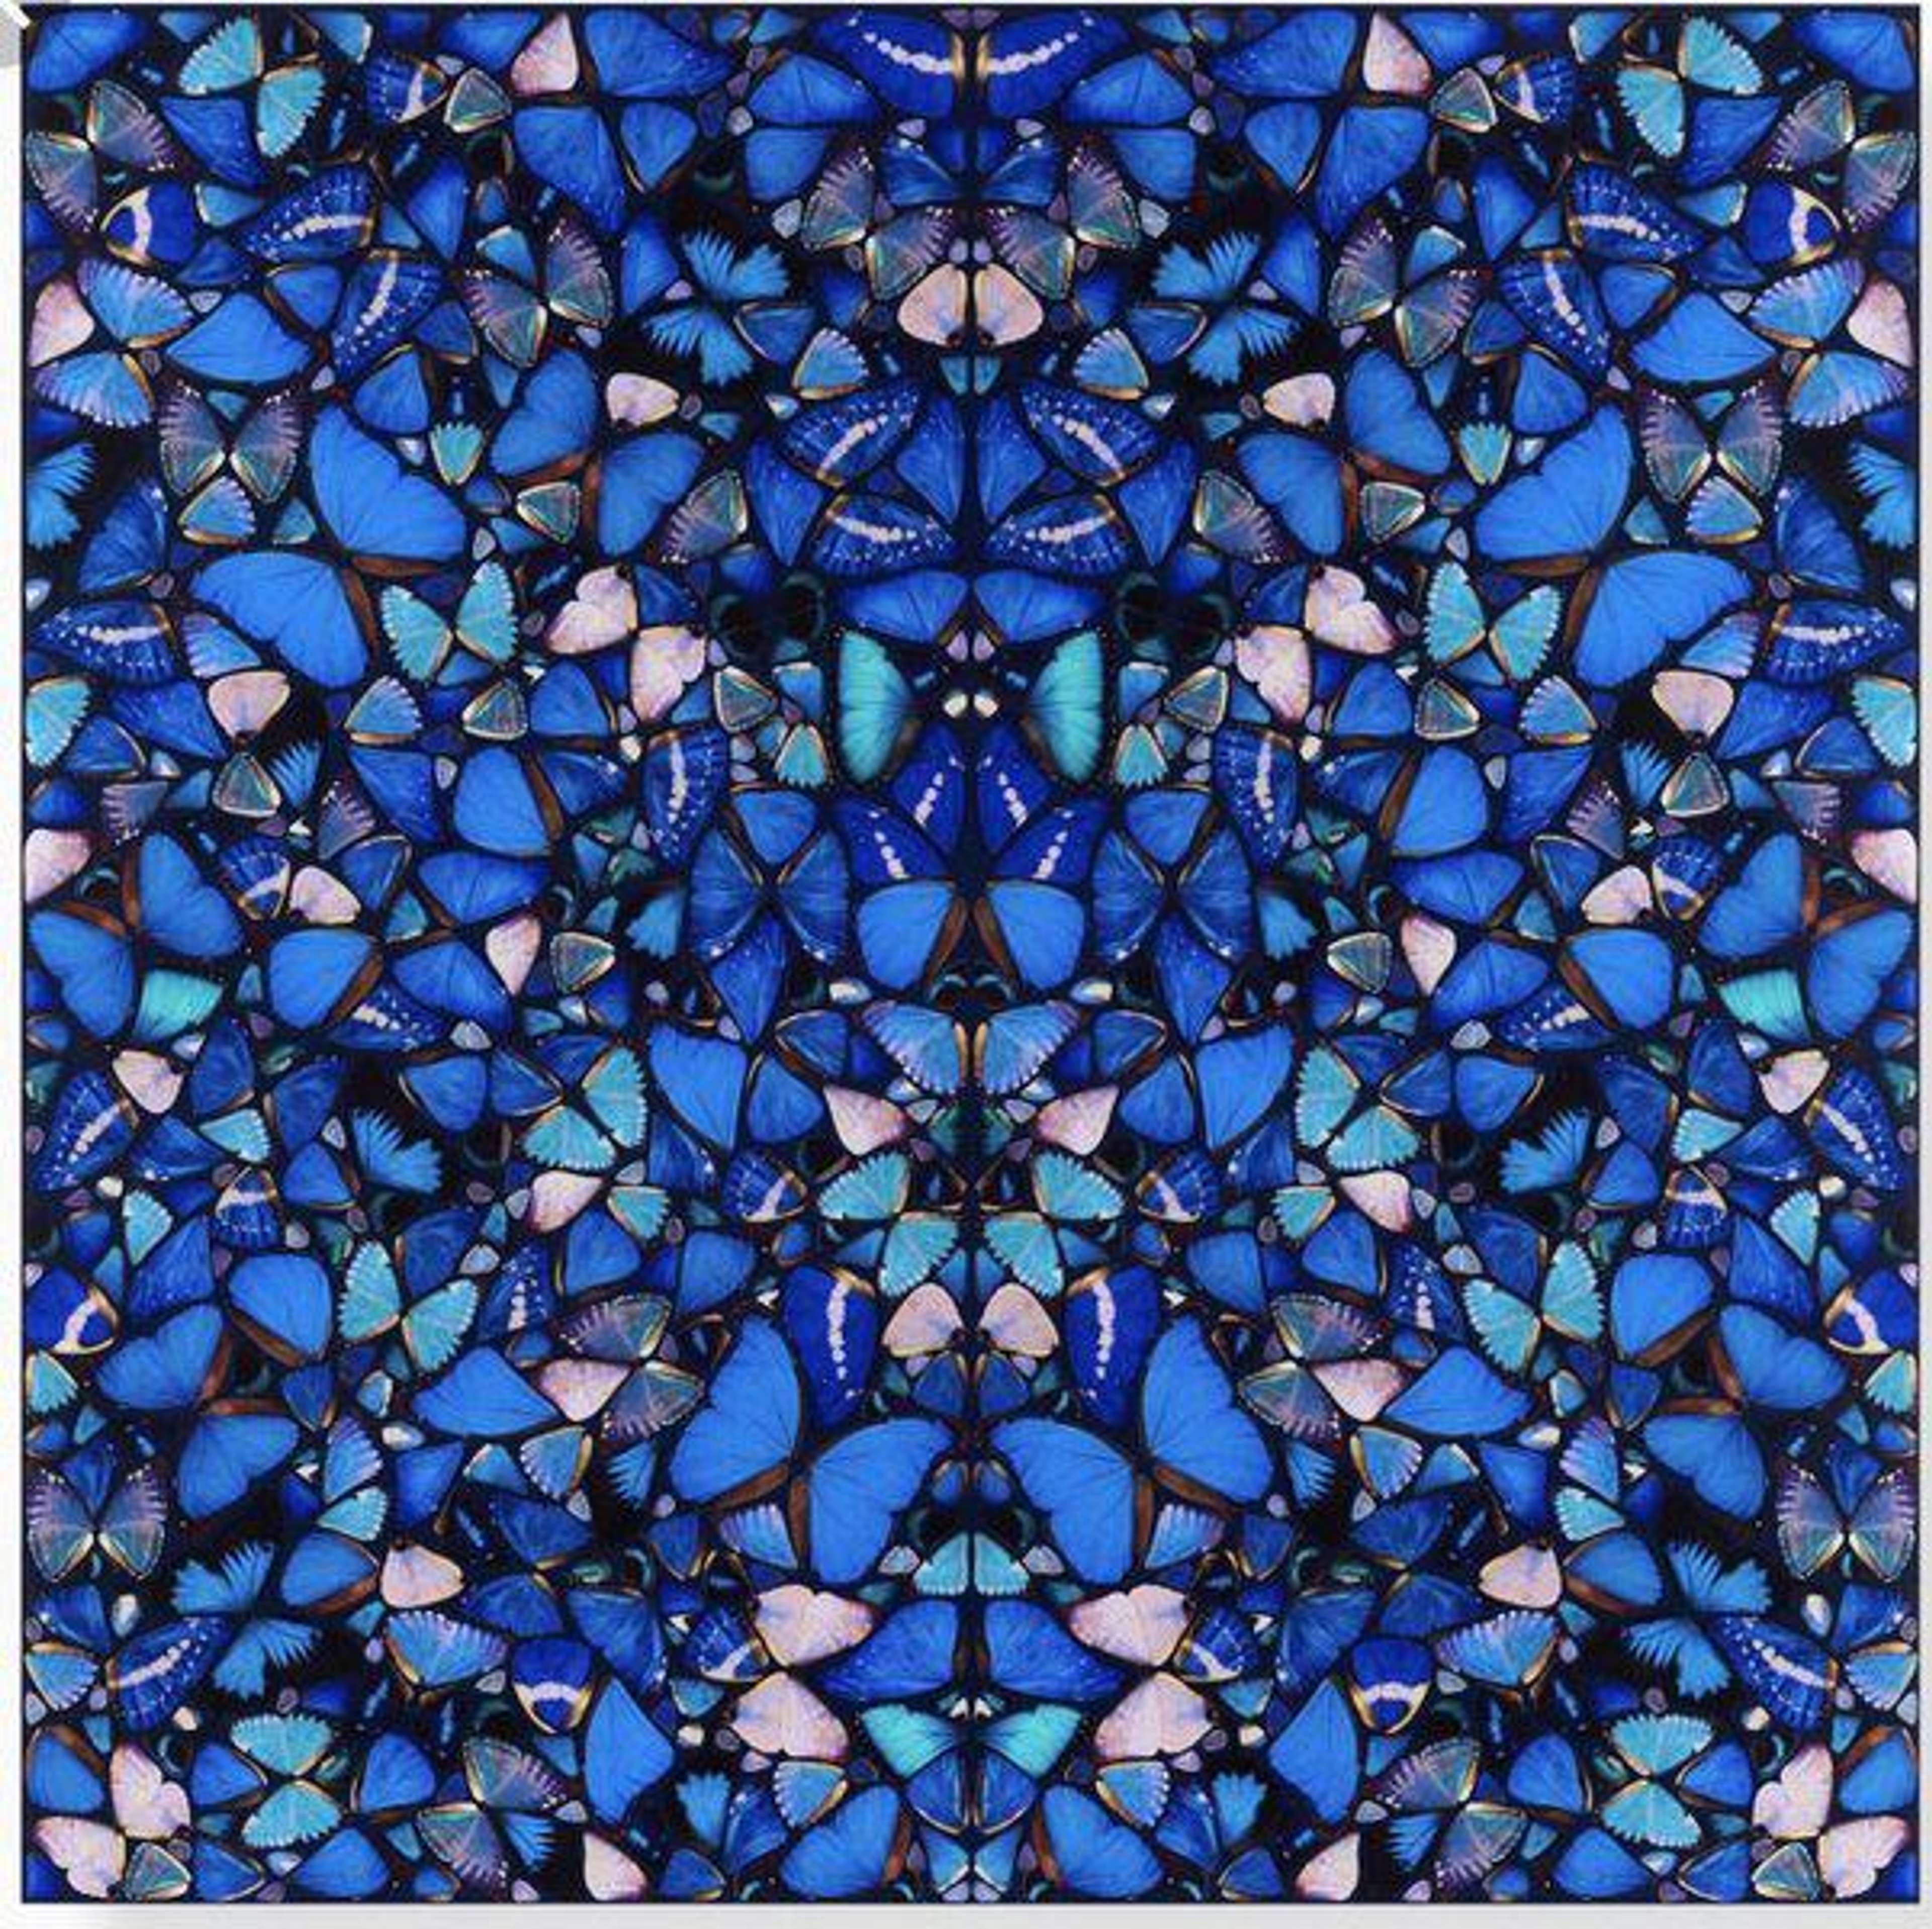 An image of Damien Hirst's artwork titled H6-1 Mercy. The piece features a mosaic composition of butterflies in various shades of blue.